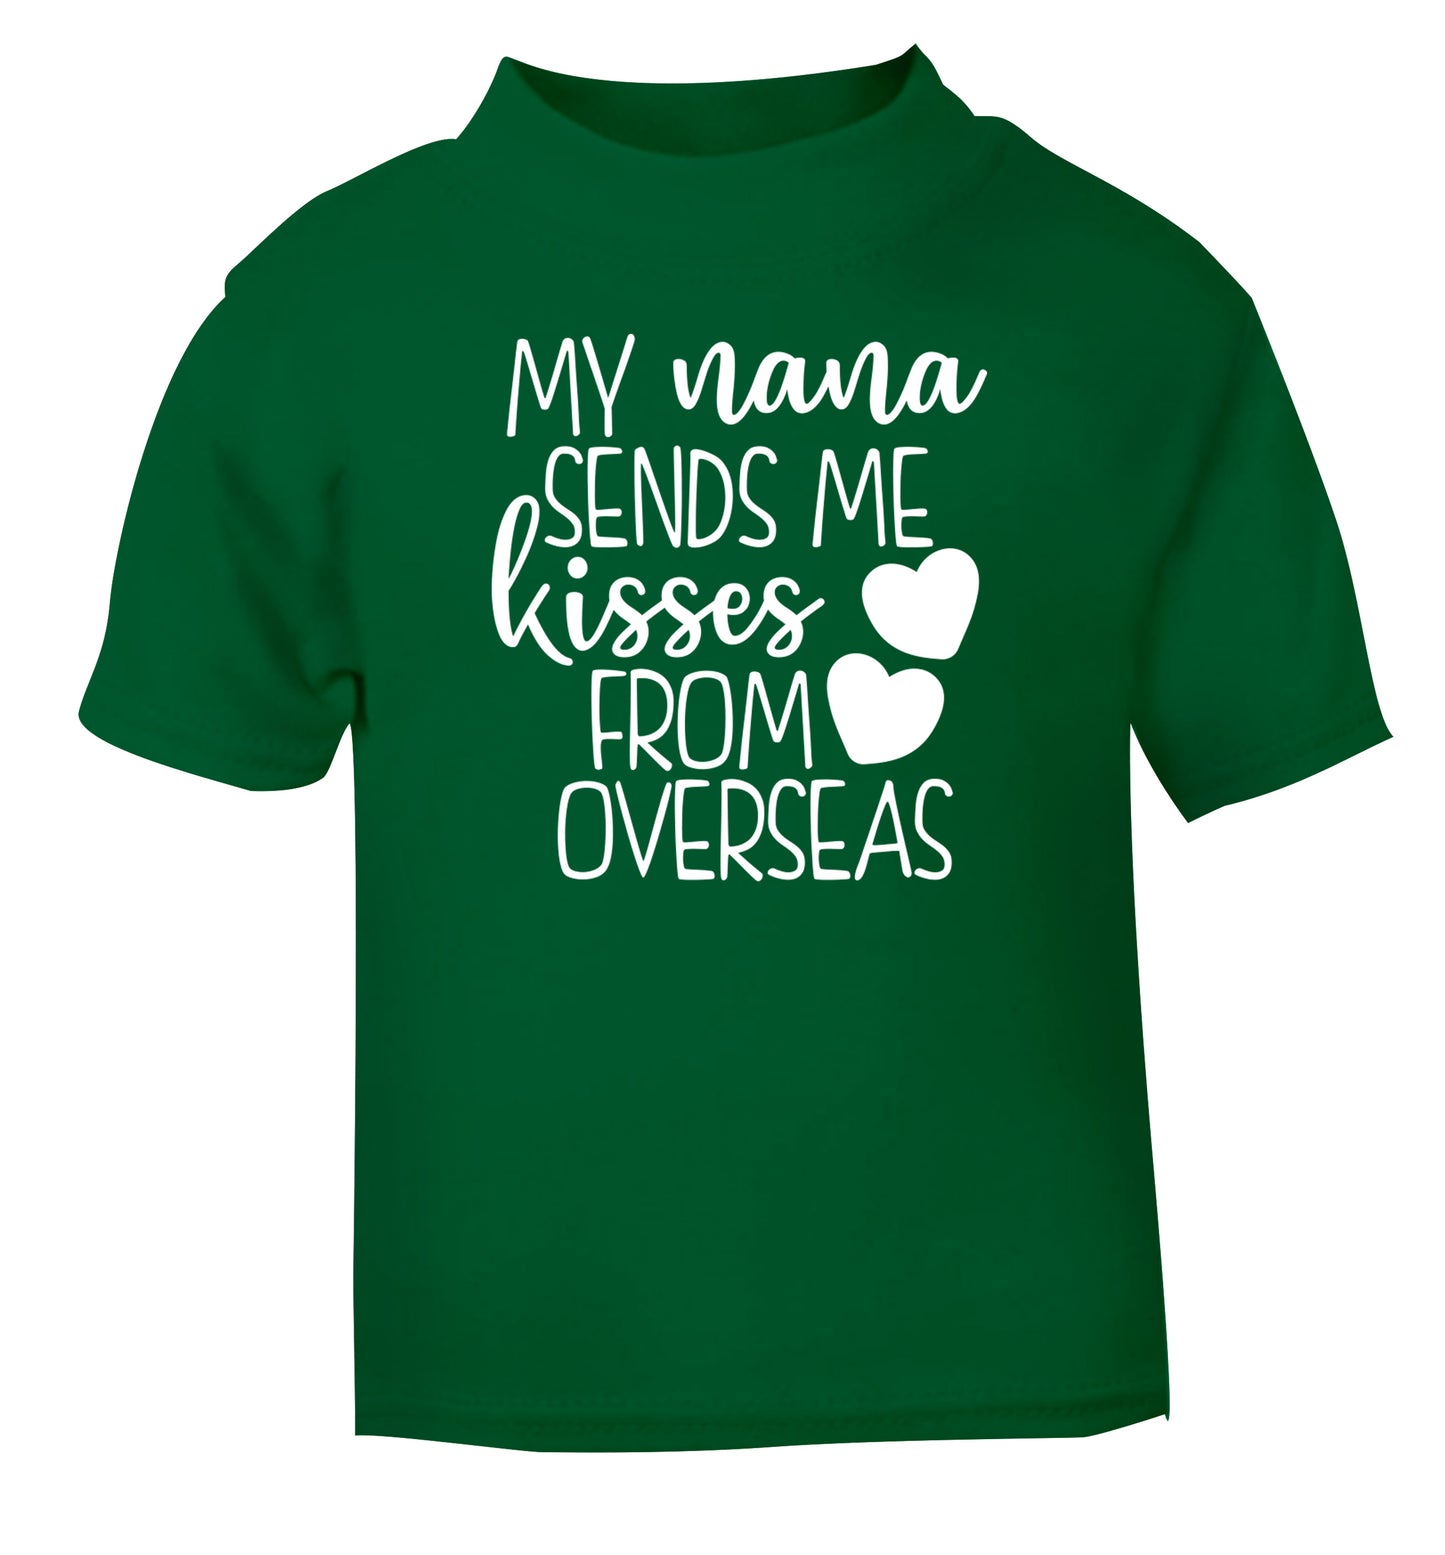 My nana sends me kisses from overseas green Baby Toddler Tshirt 2 Years